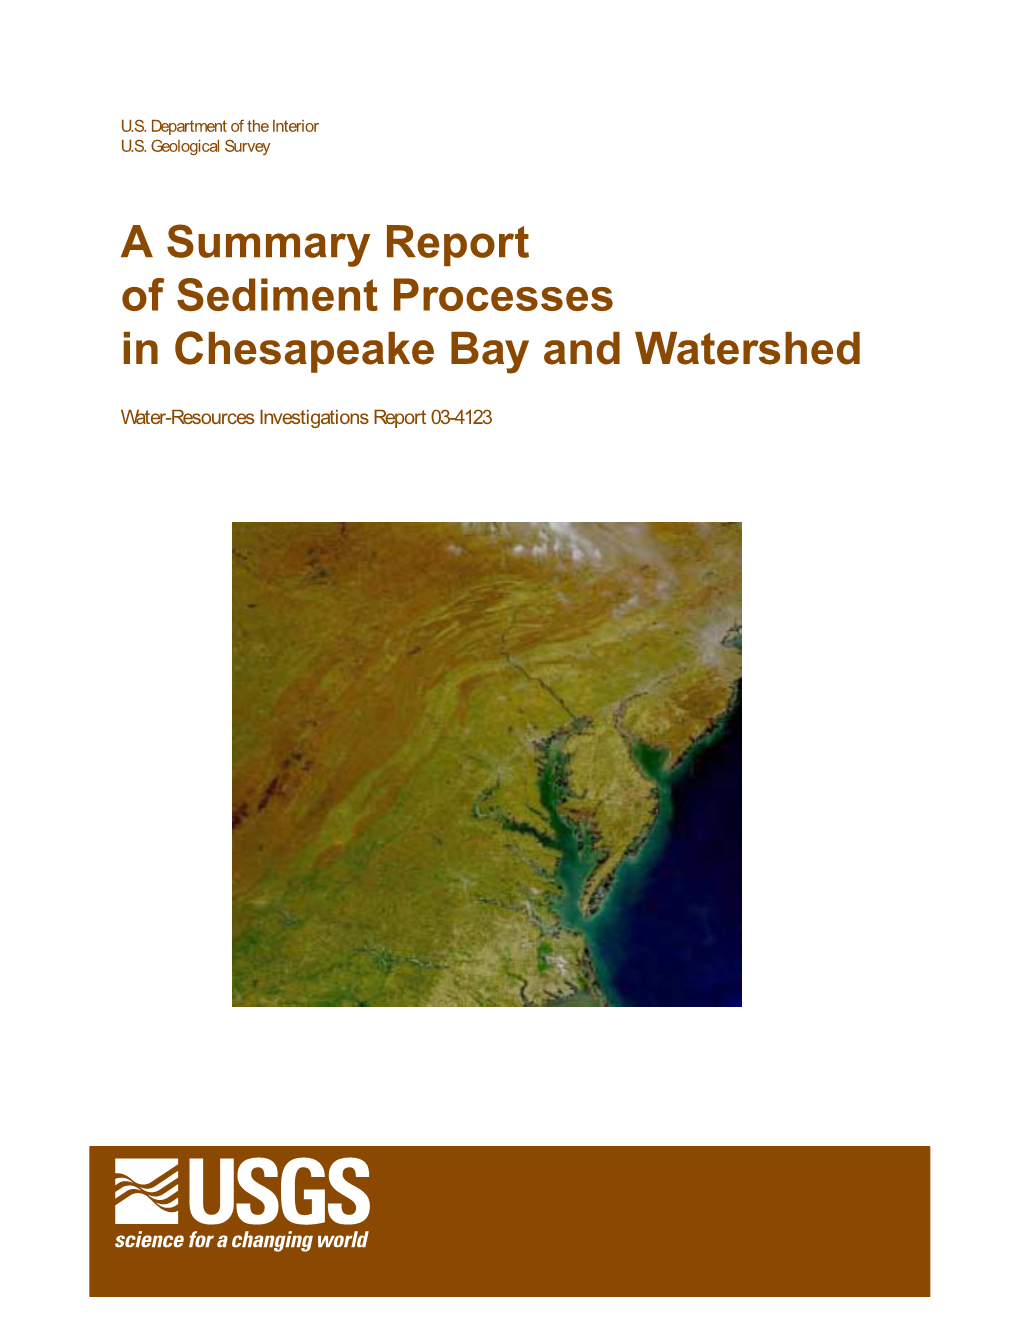 A Summary Report of Sediment Processes in Chesapeake Bay and Watershed